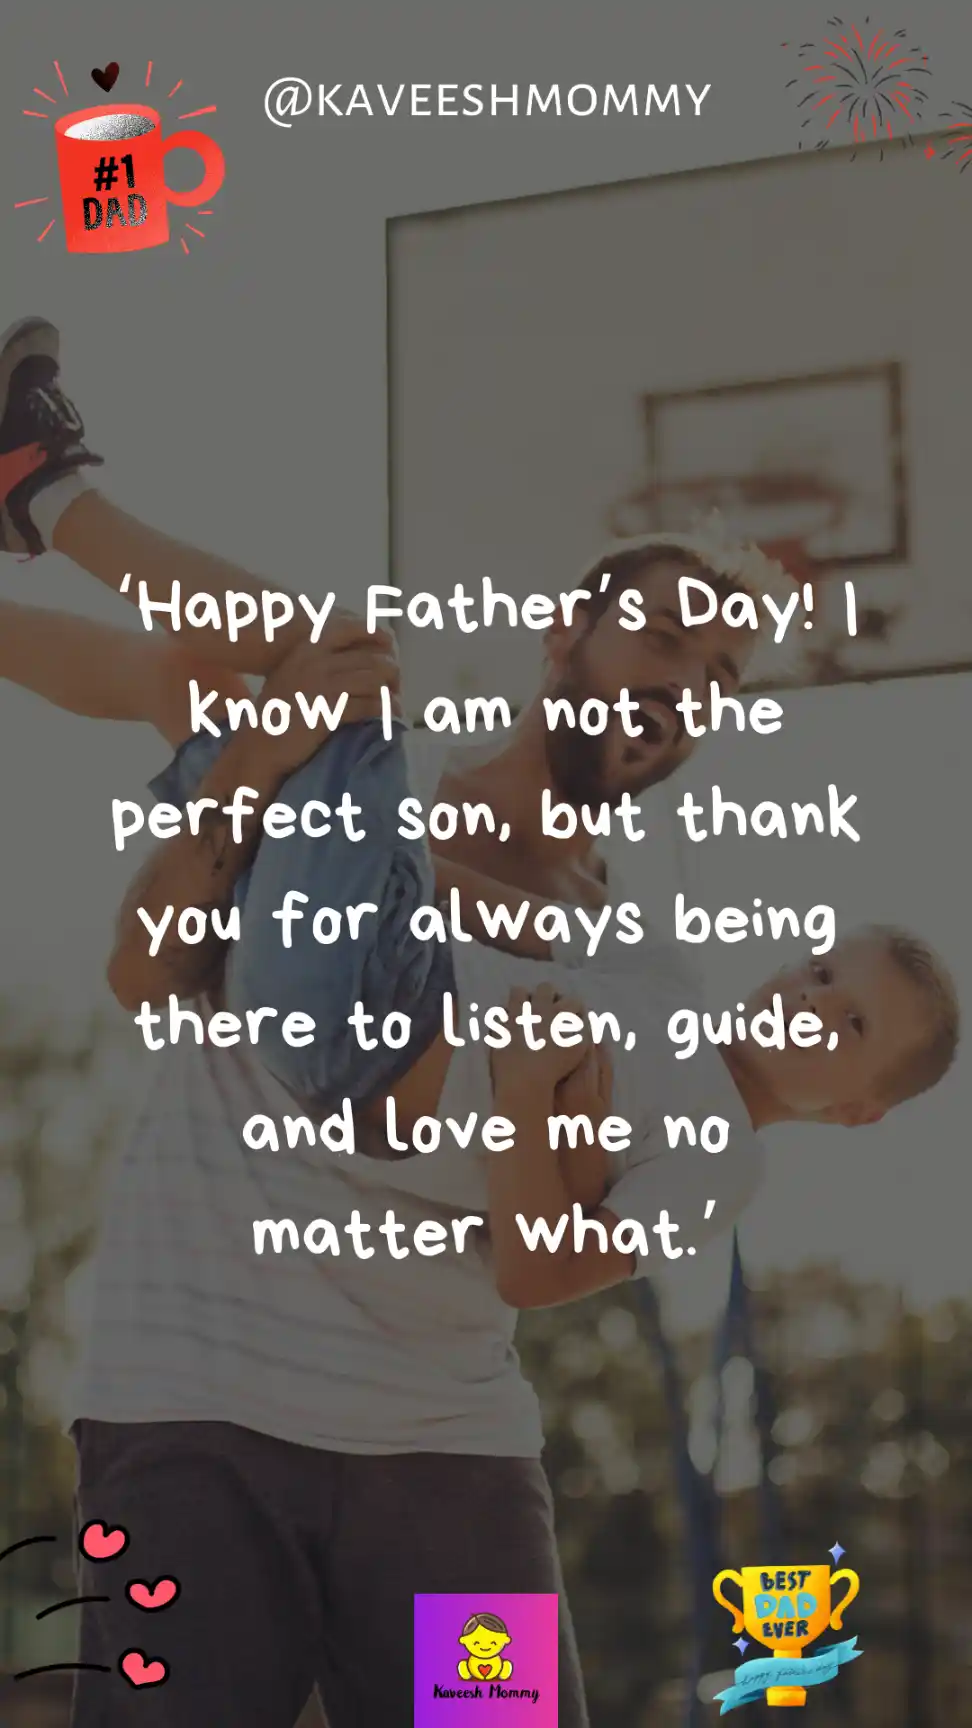 happy father's day to my son from mom-Happy Father’s Day! I know I am not the perfect son, but thank you for always being there to listen, guide, and love me no matter what